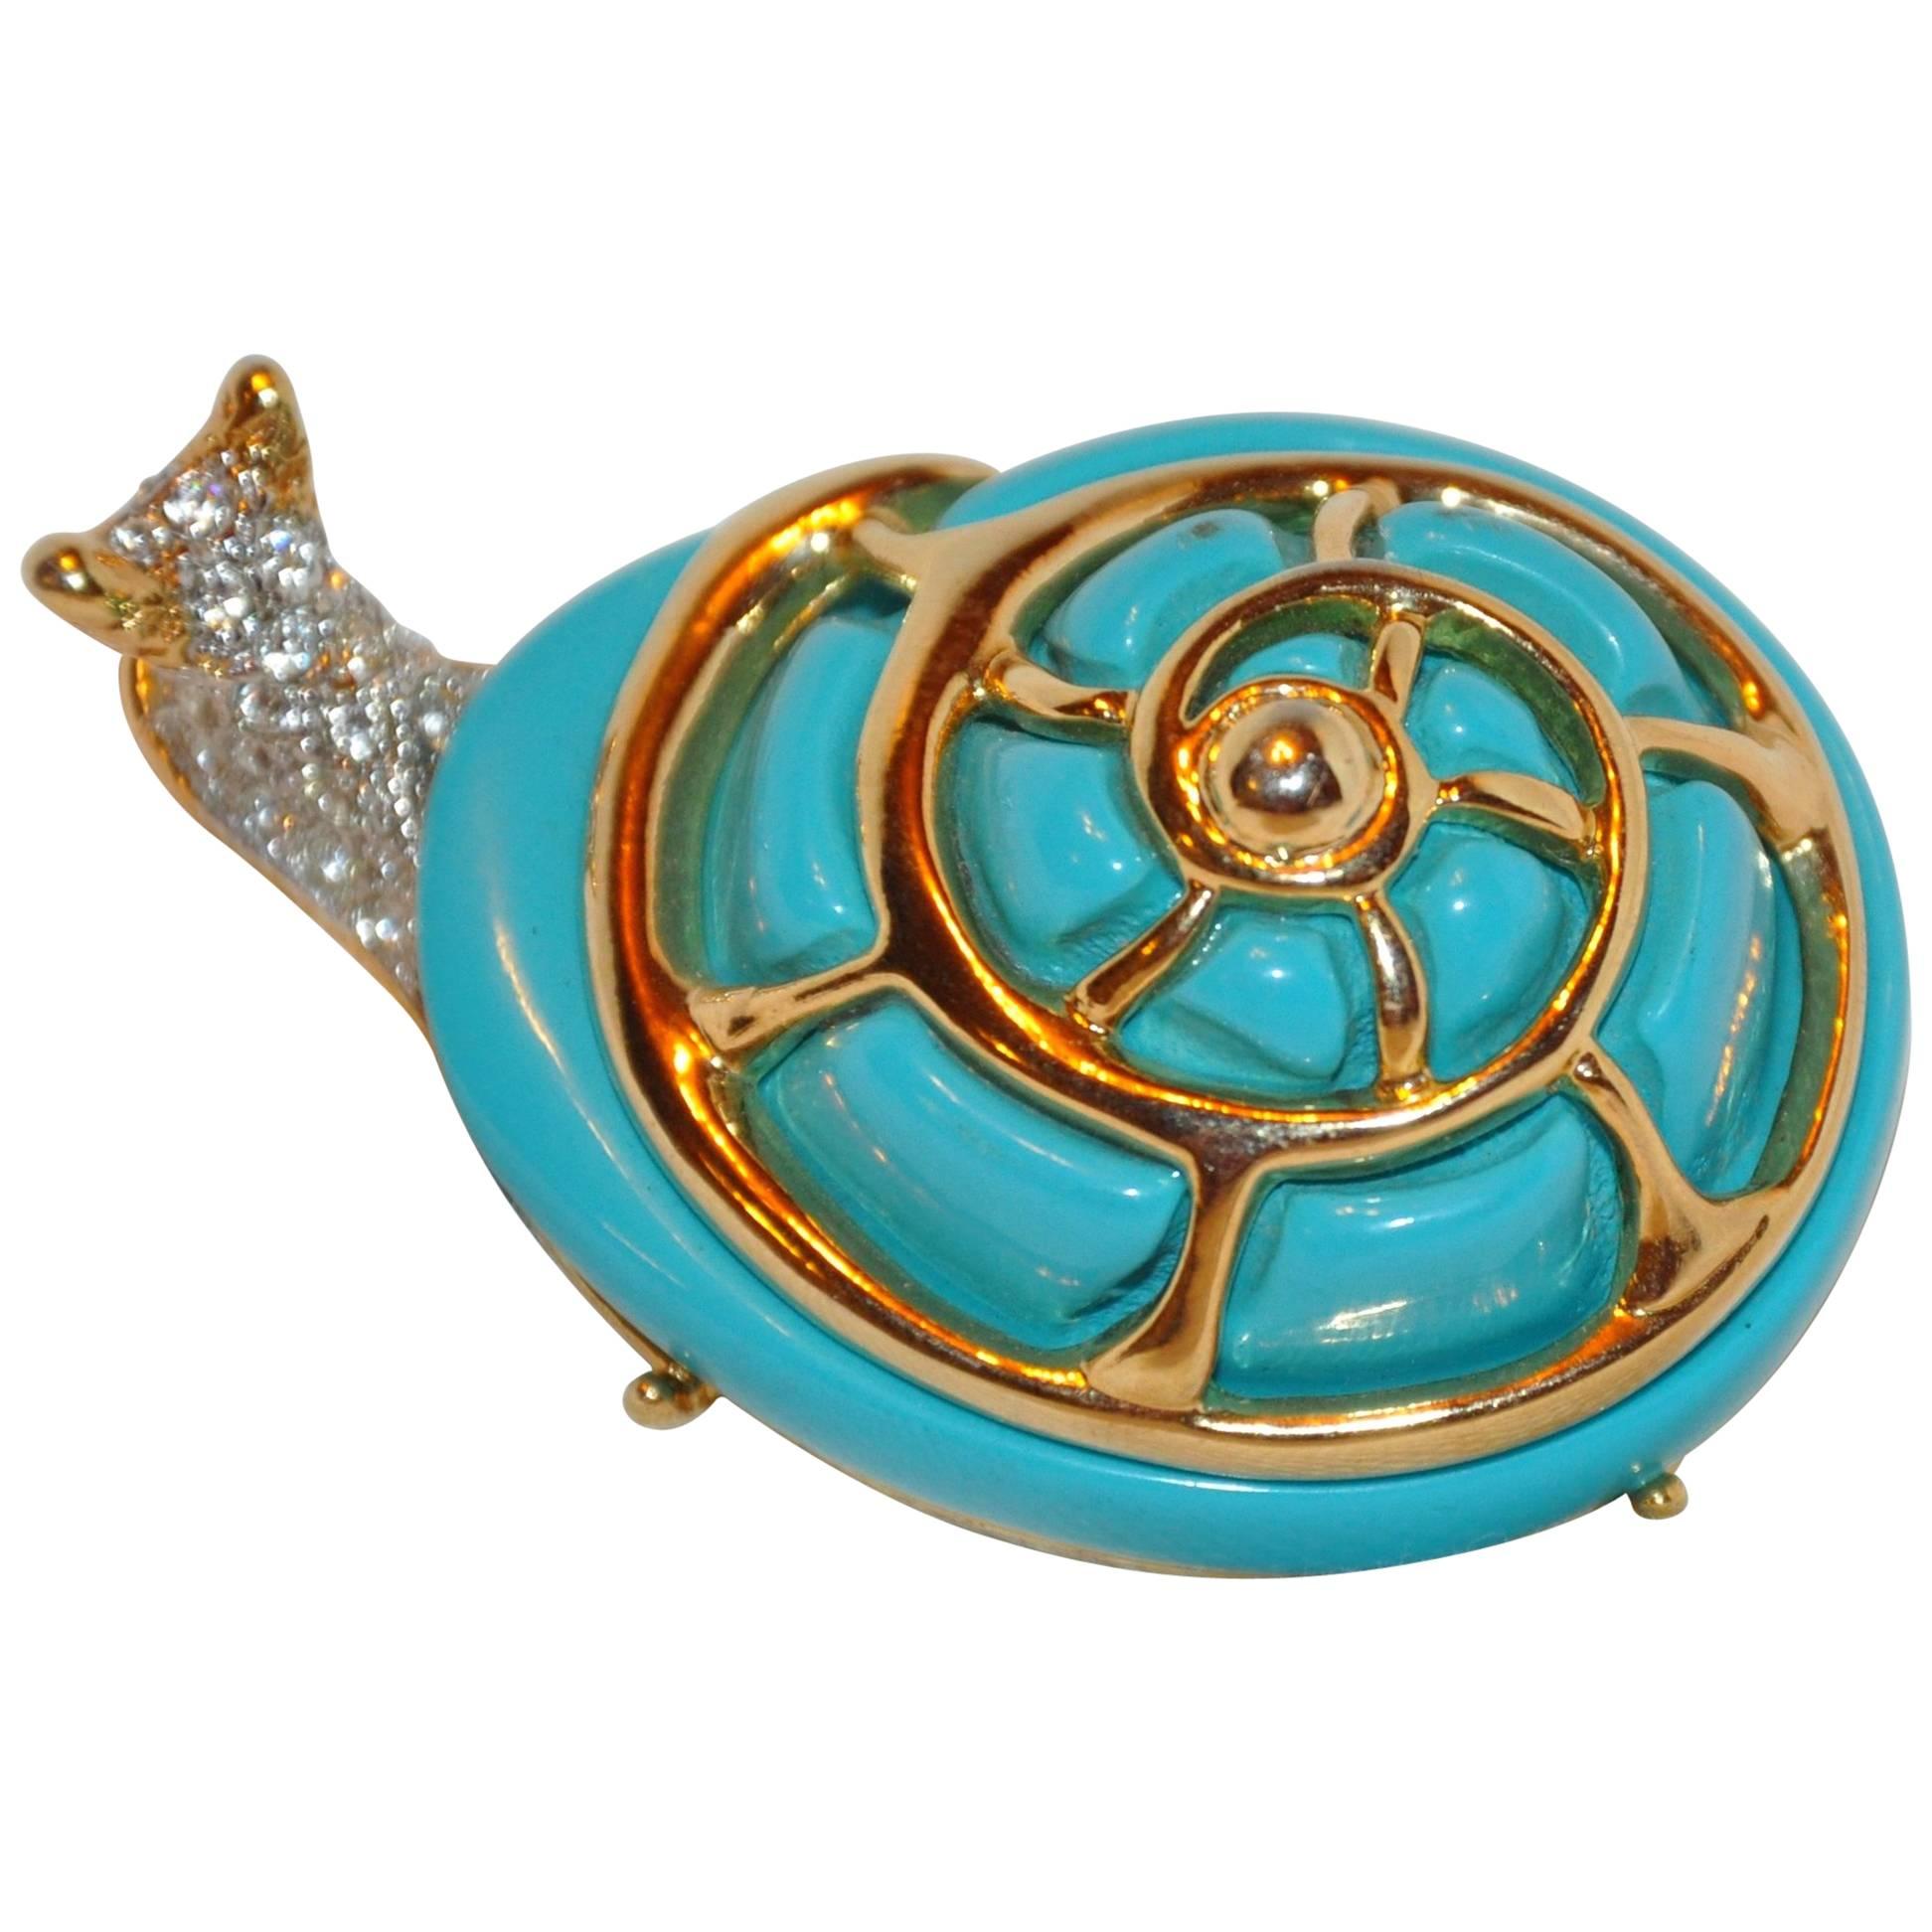 Kenneth Jay Lane Huge Whimsical Faux Turquoise with Gold "Snail" Brooch